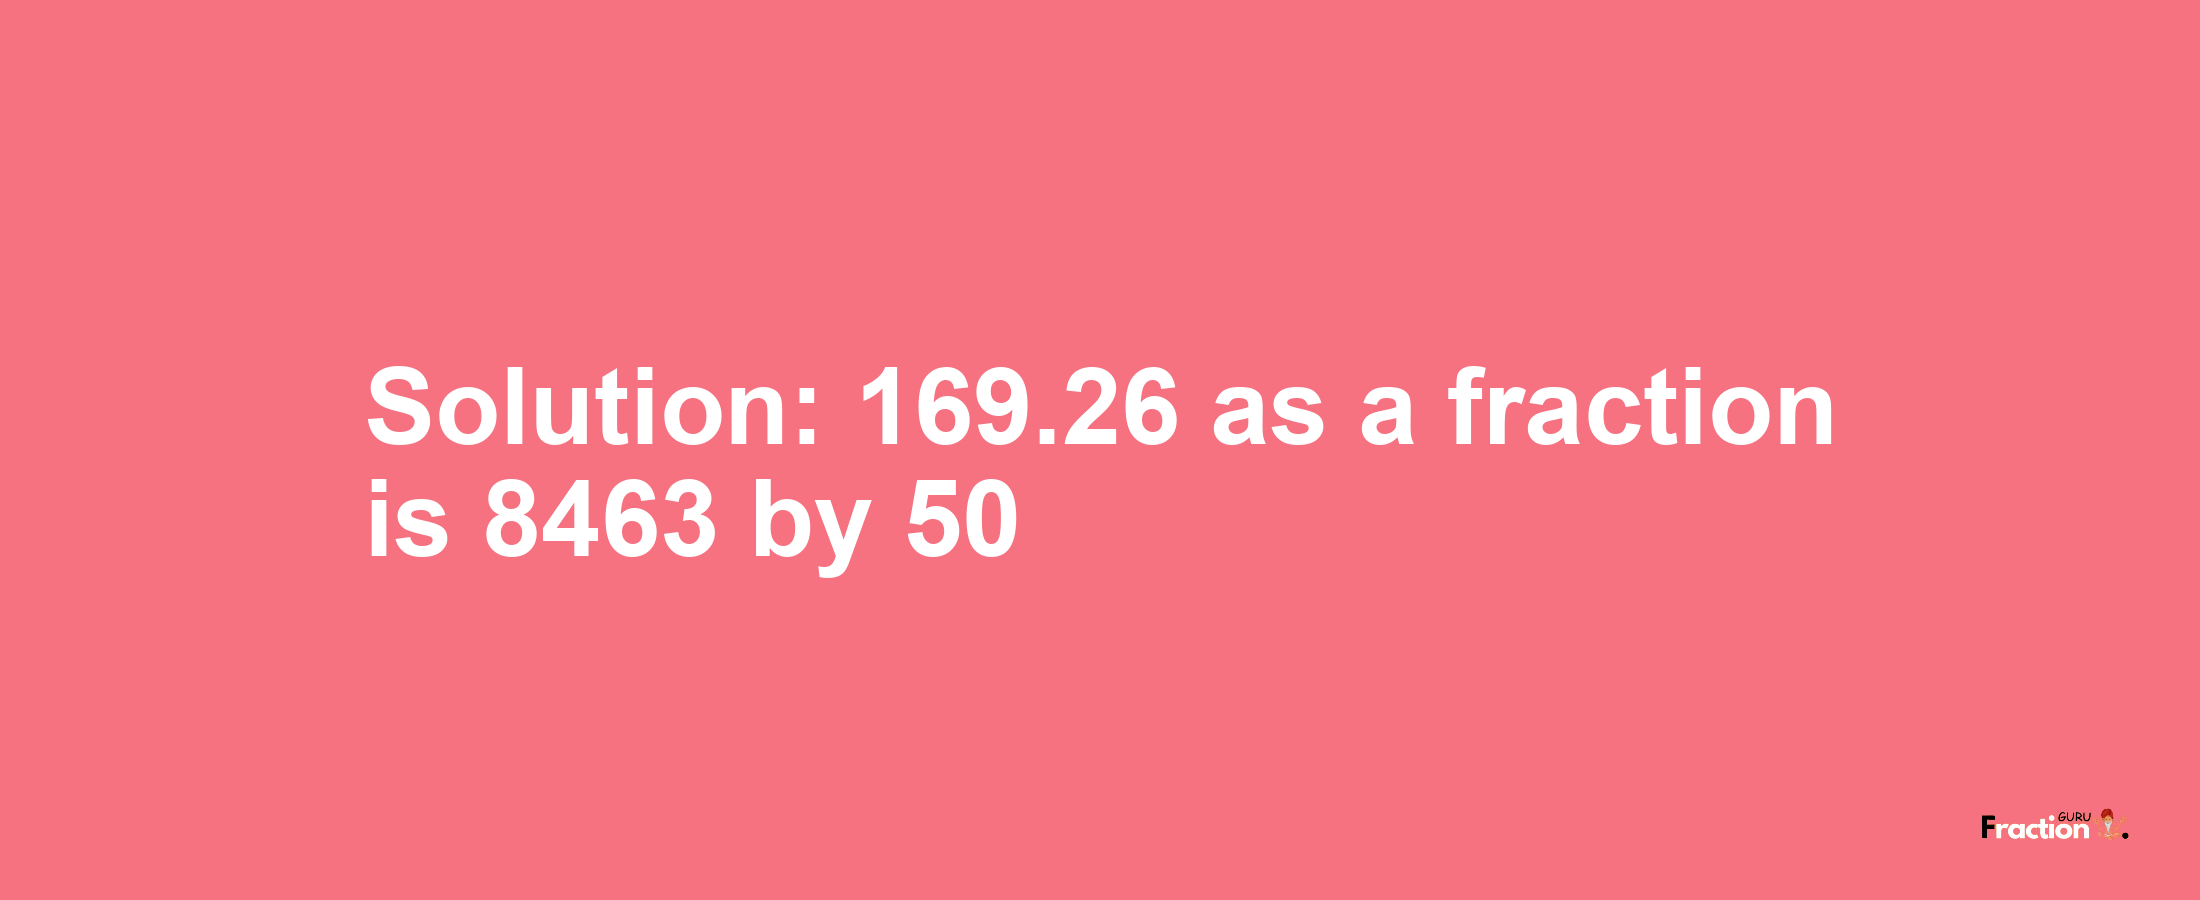 Solution:169.26 as a fraction is 8463/50